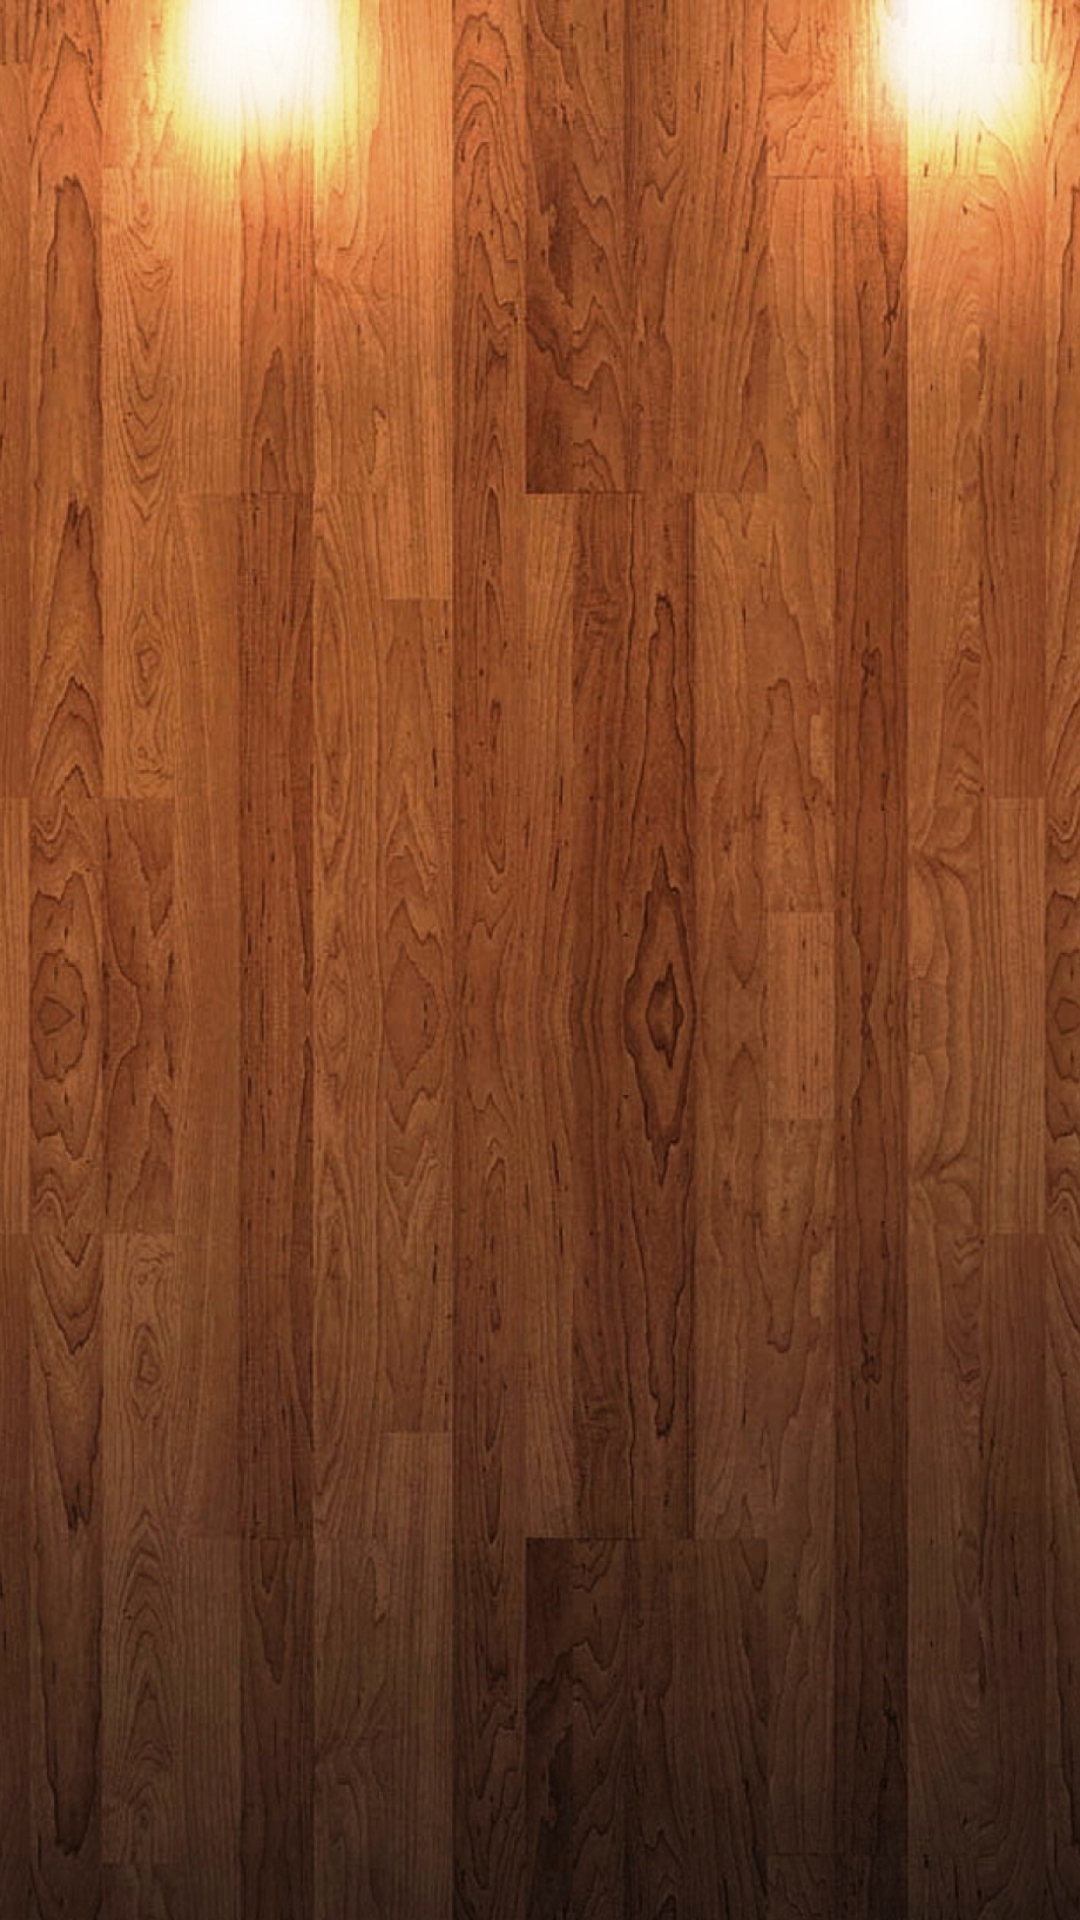 Das Simple and Beautifull Wood Texture Wallpaper 1080x1920